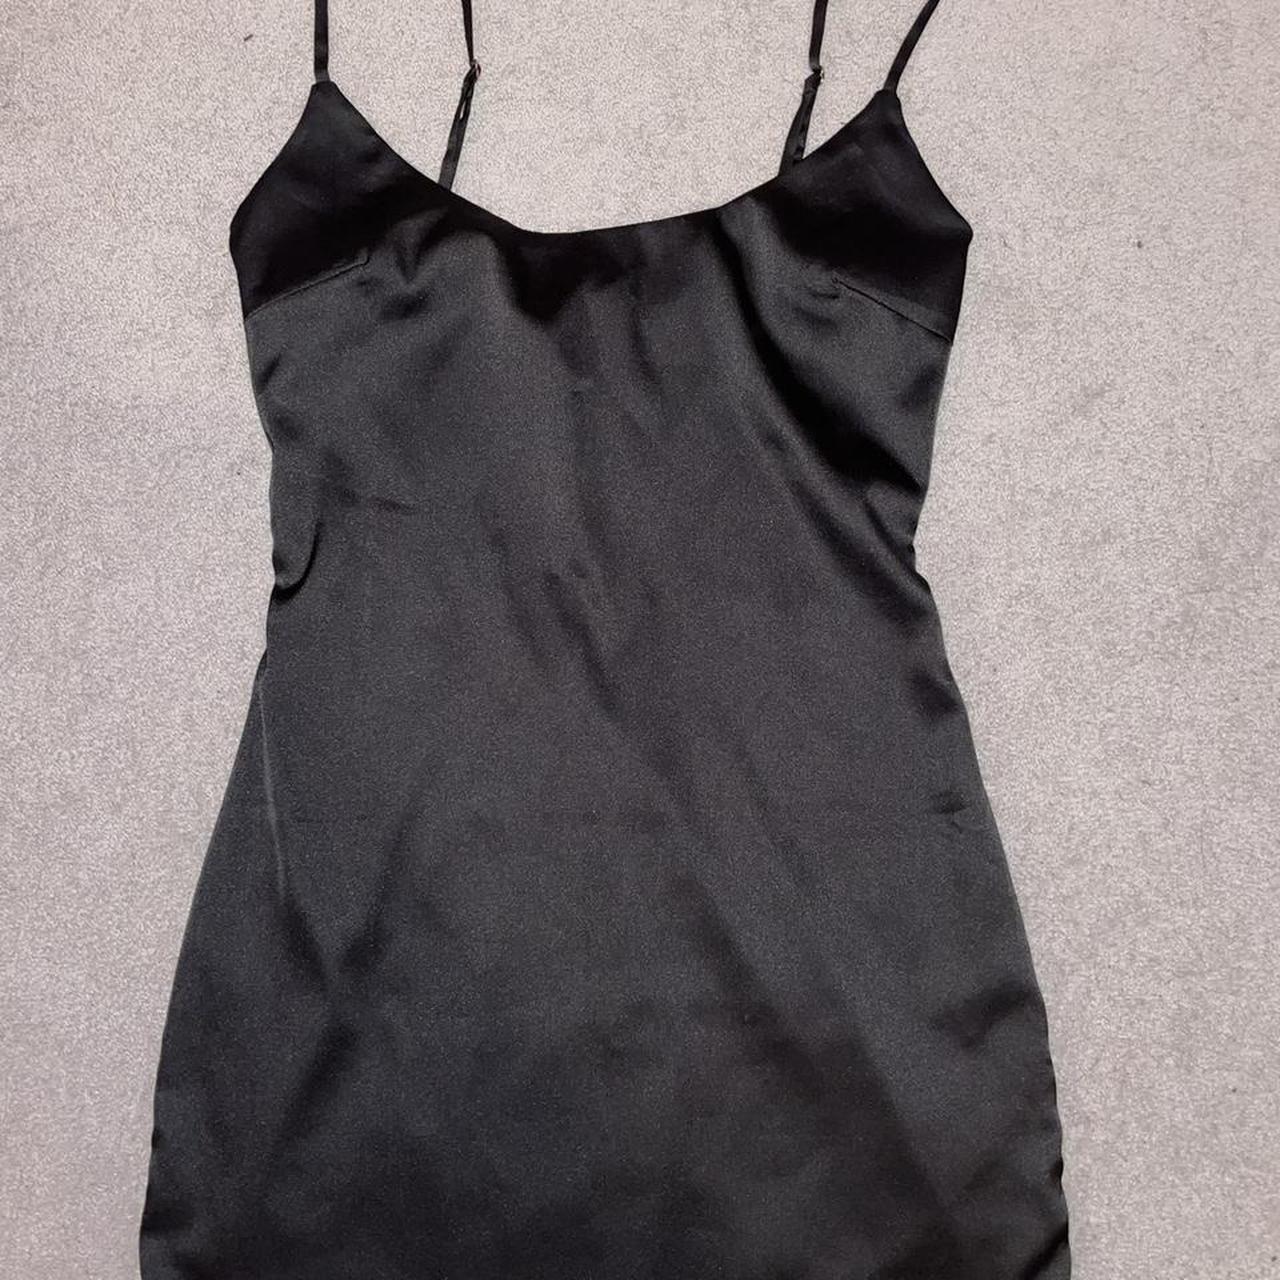 Oh Polly black satin dress Sold out on the website... - Depop